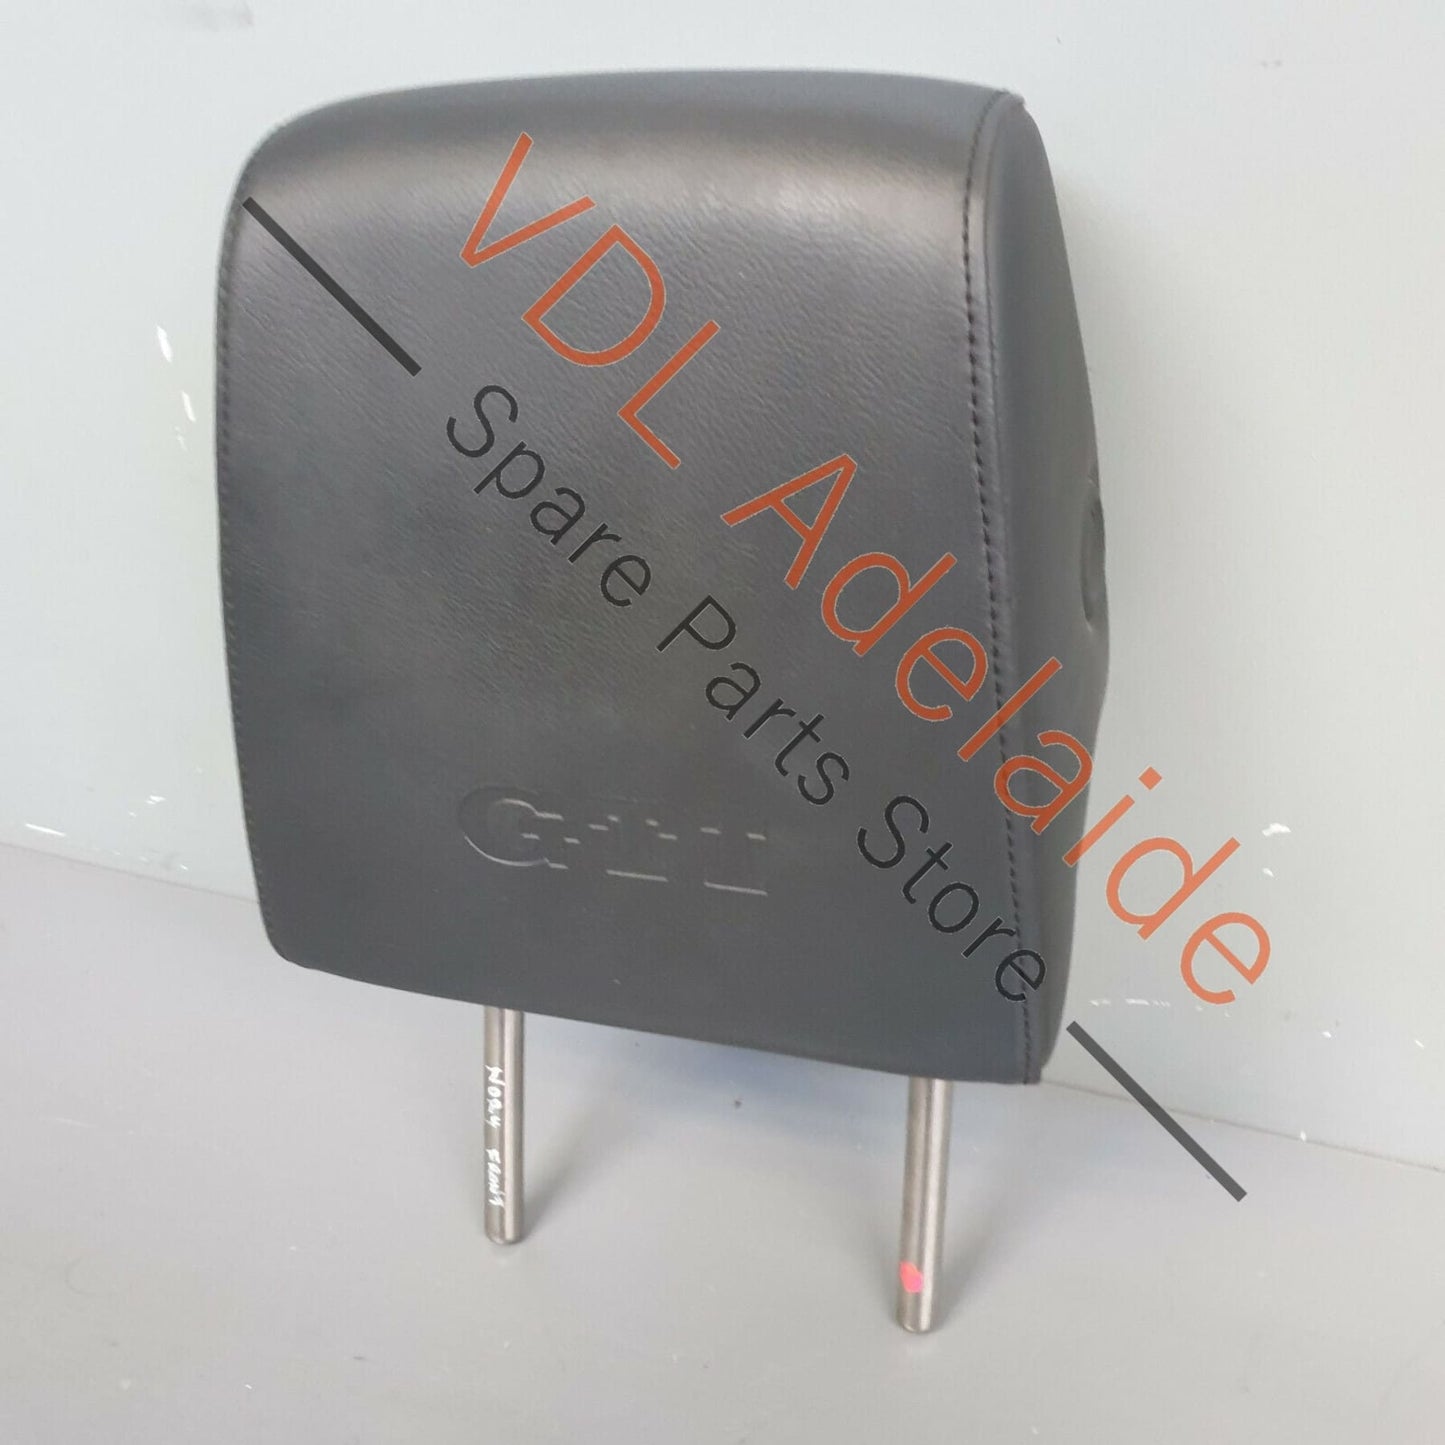 Volkswagen VW Golf GTi Mk6 Front Seat Black Leather Head Rest for Left or Right